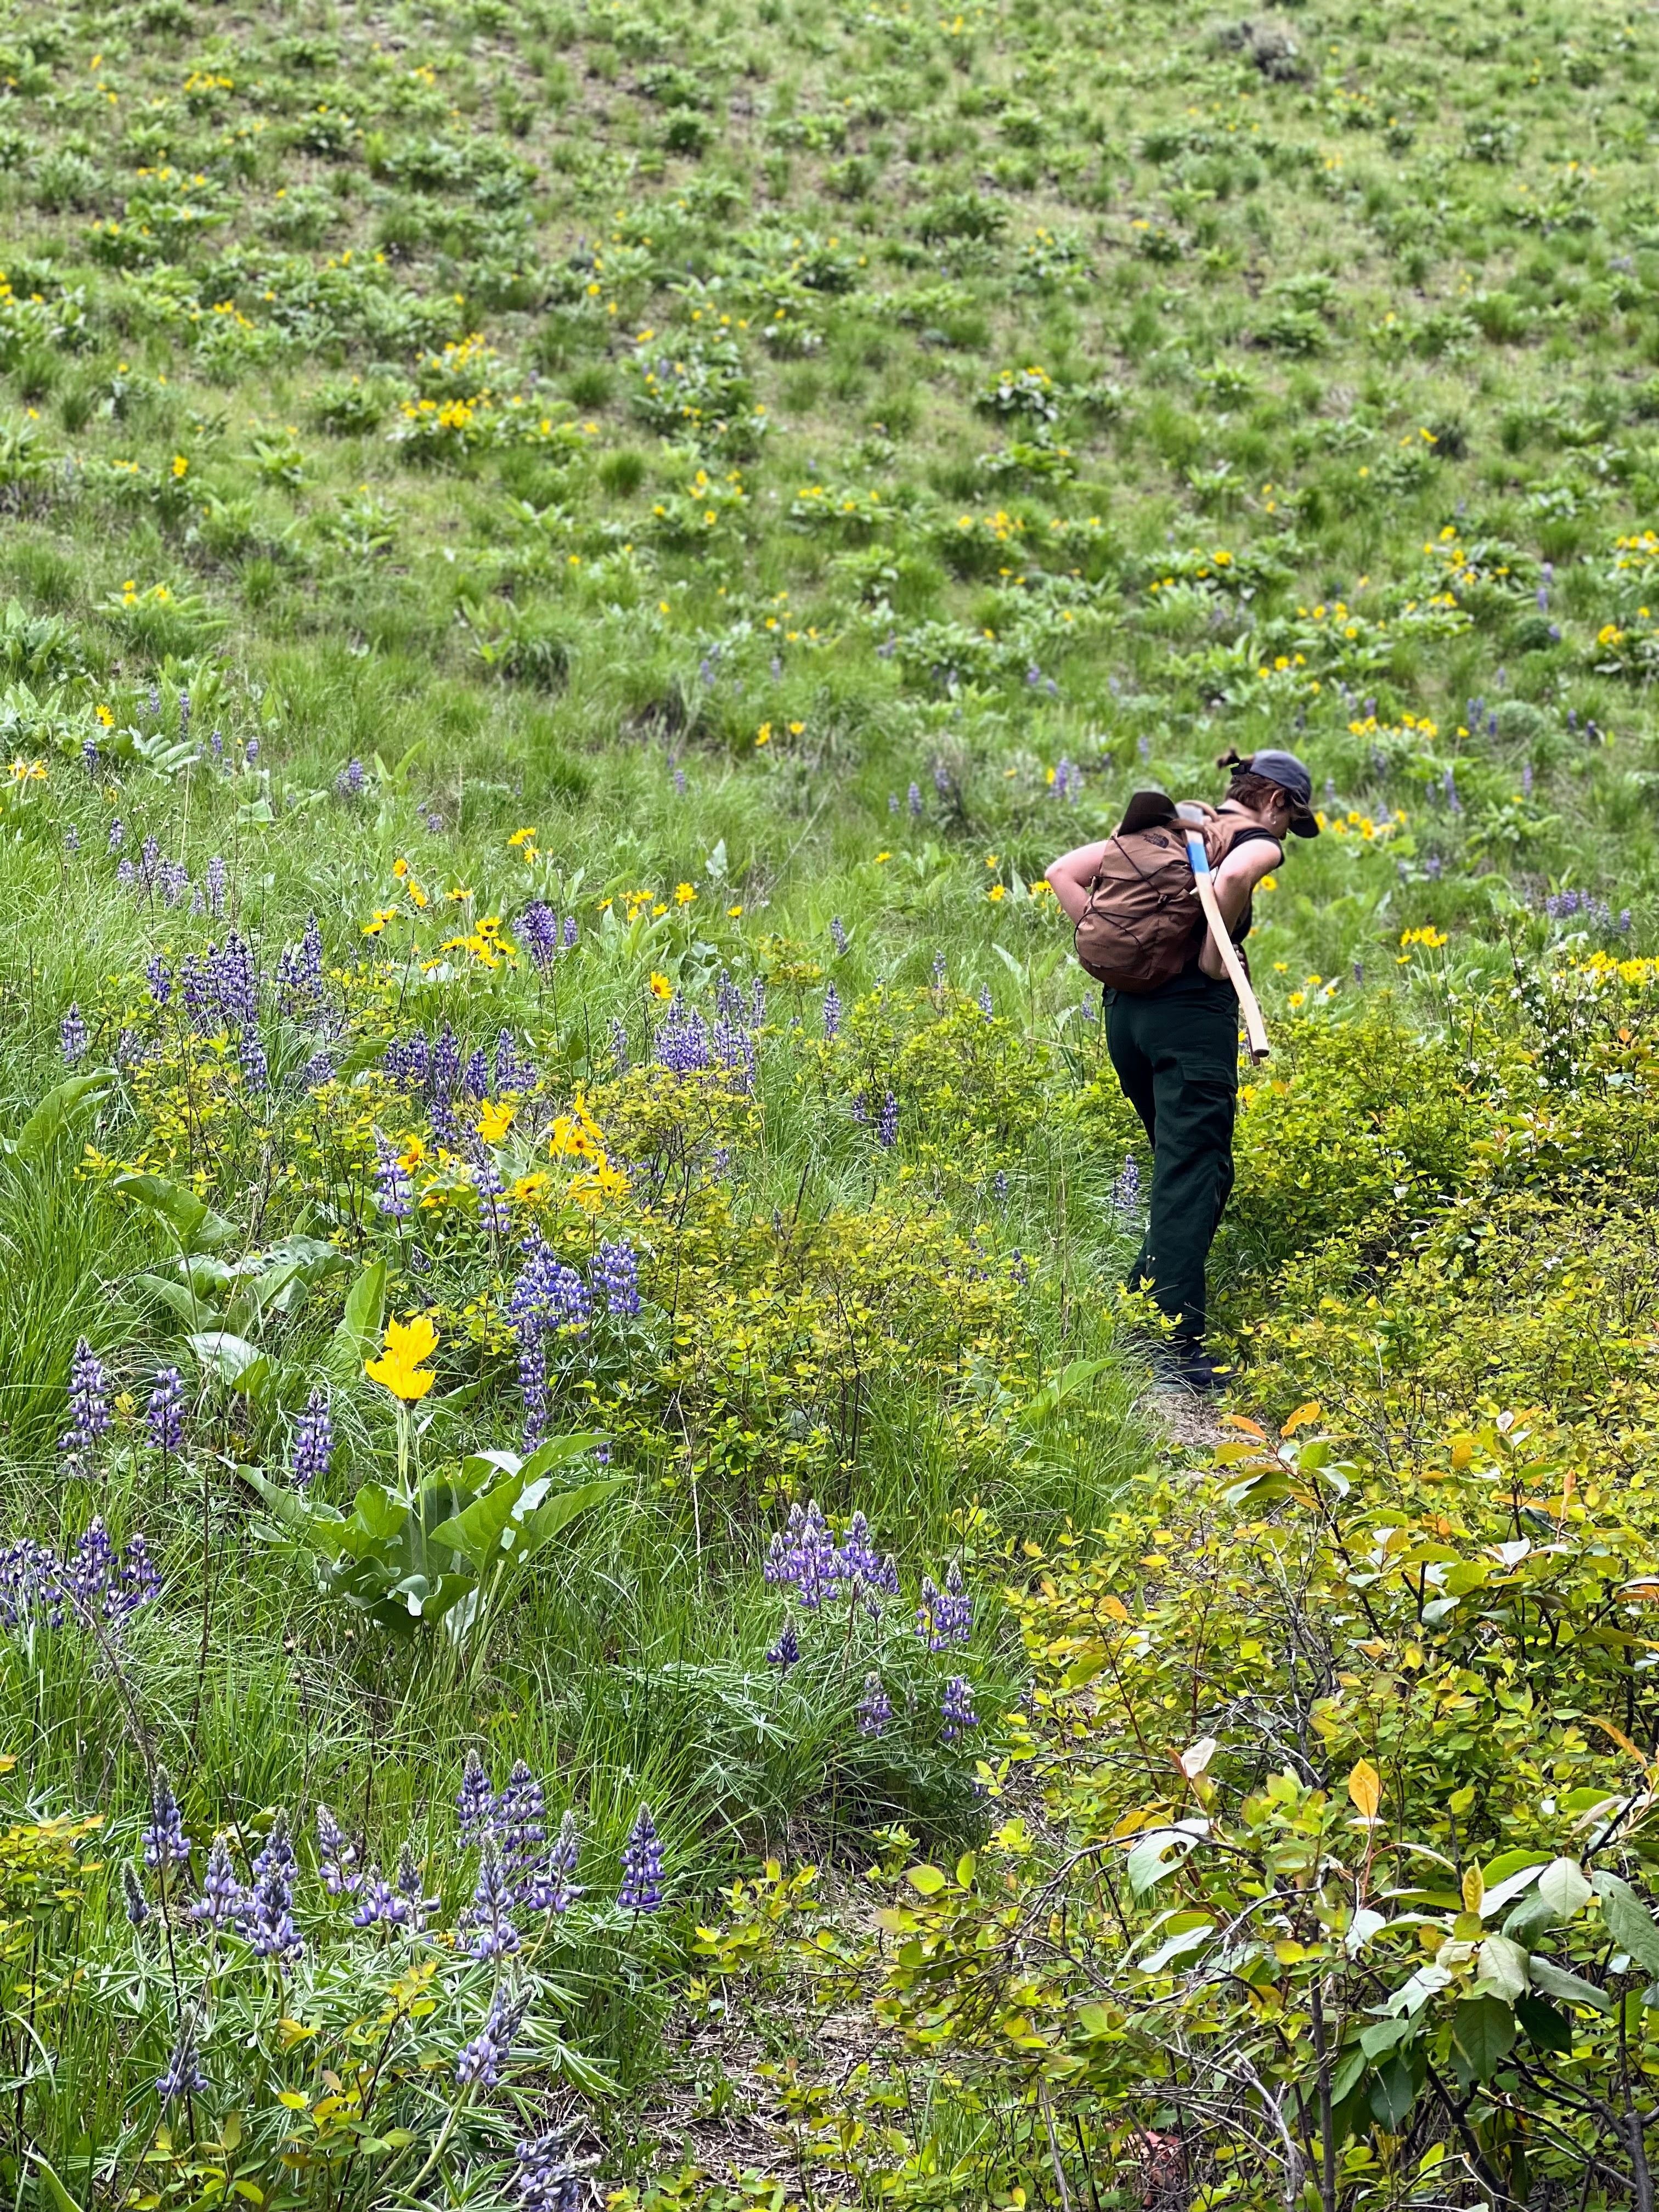 A person with their back to the camera browses through a hillside full of wildflowers.